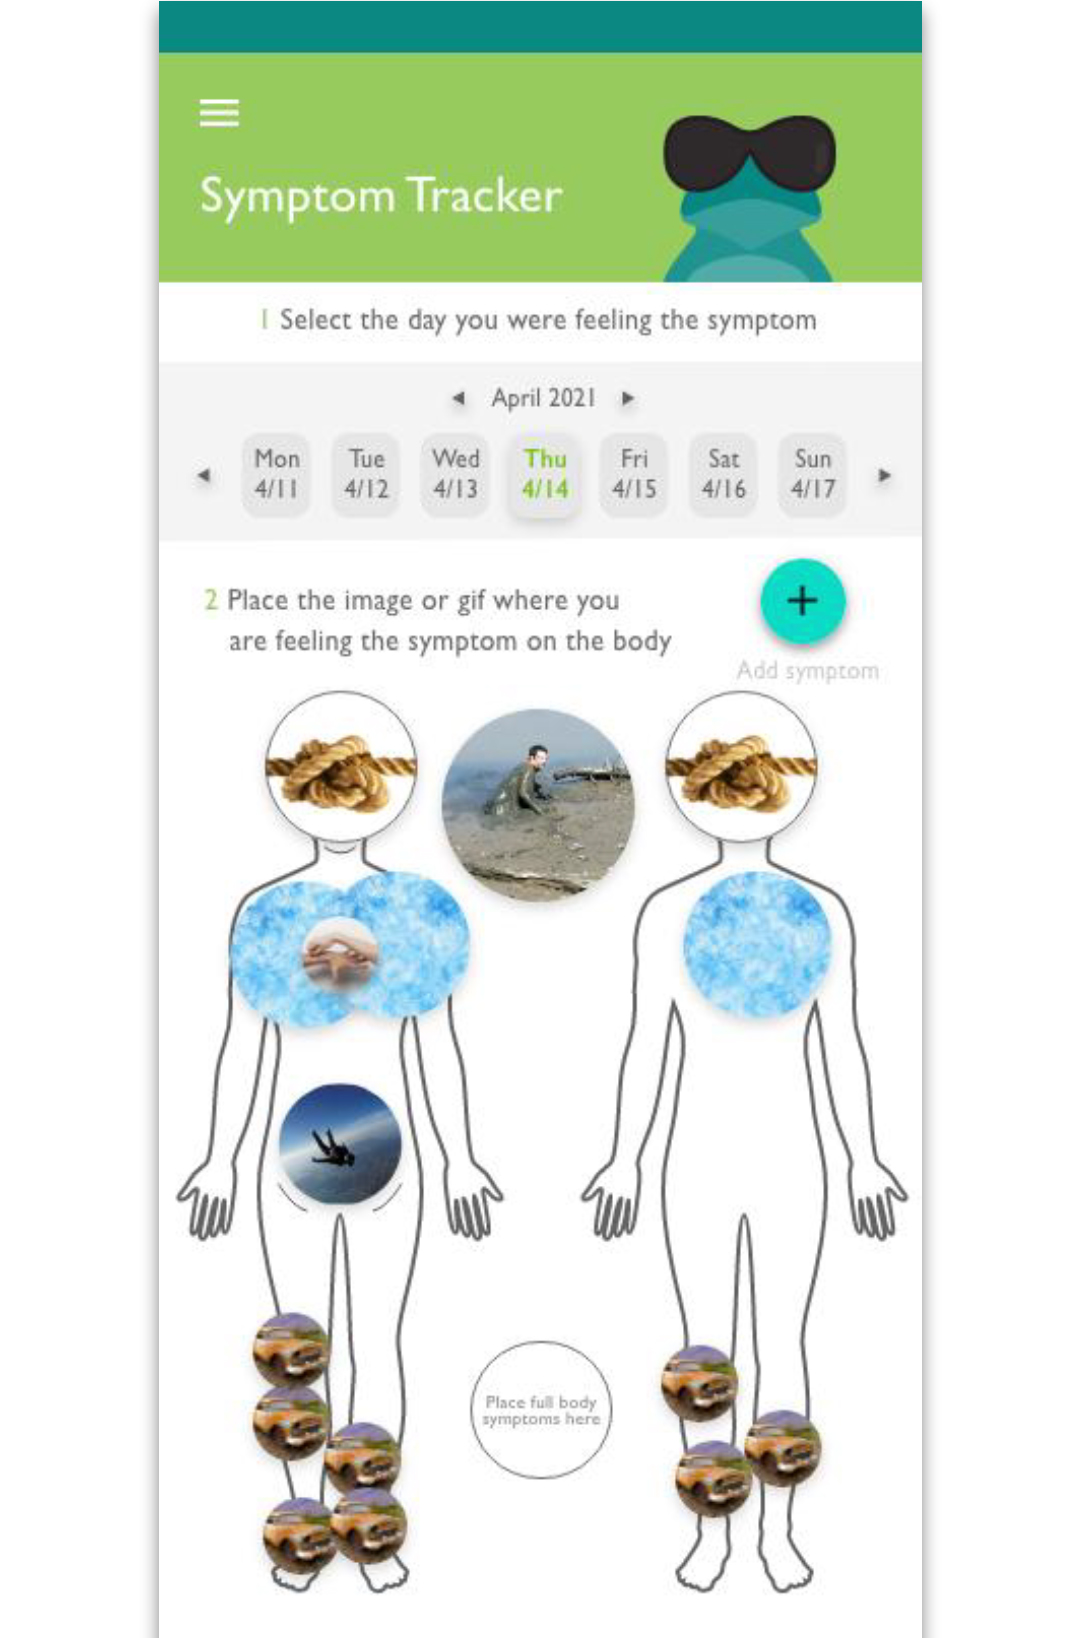 A screenshot of the Frankly app Symptom Tracker. User can select day they were feeling a symptom and place a photo representing the symptom where it occurred on the body.